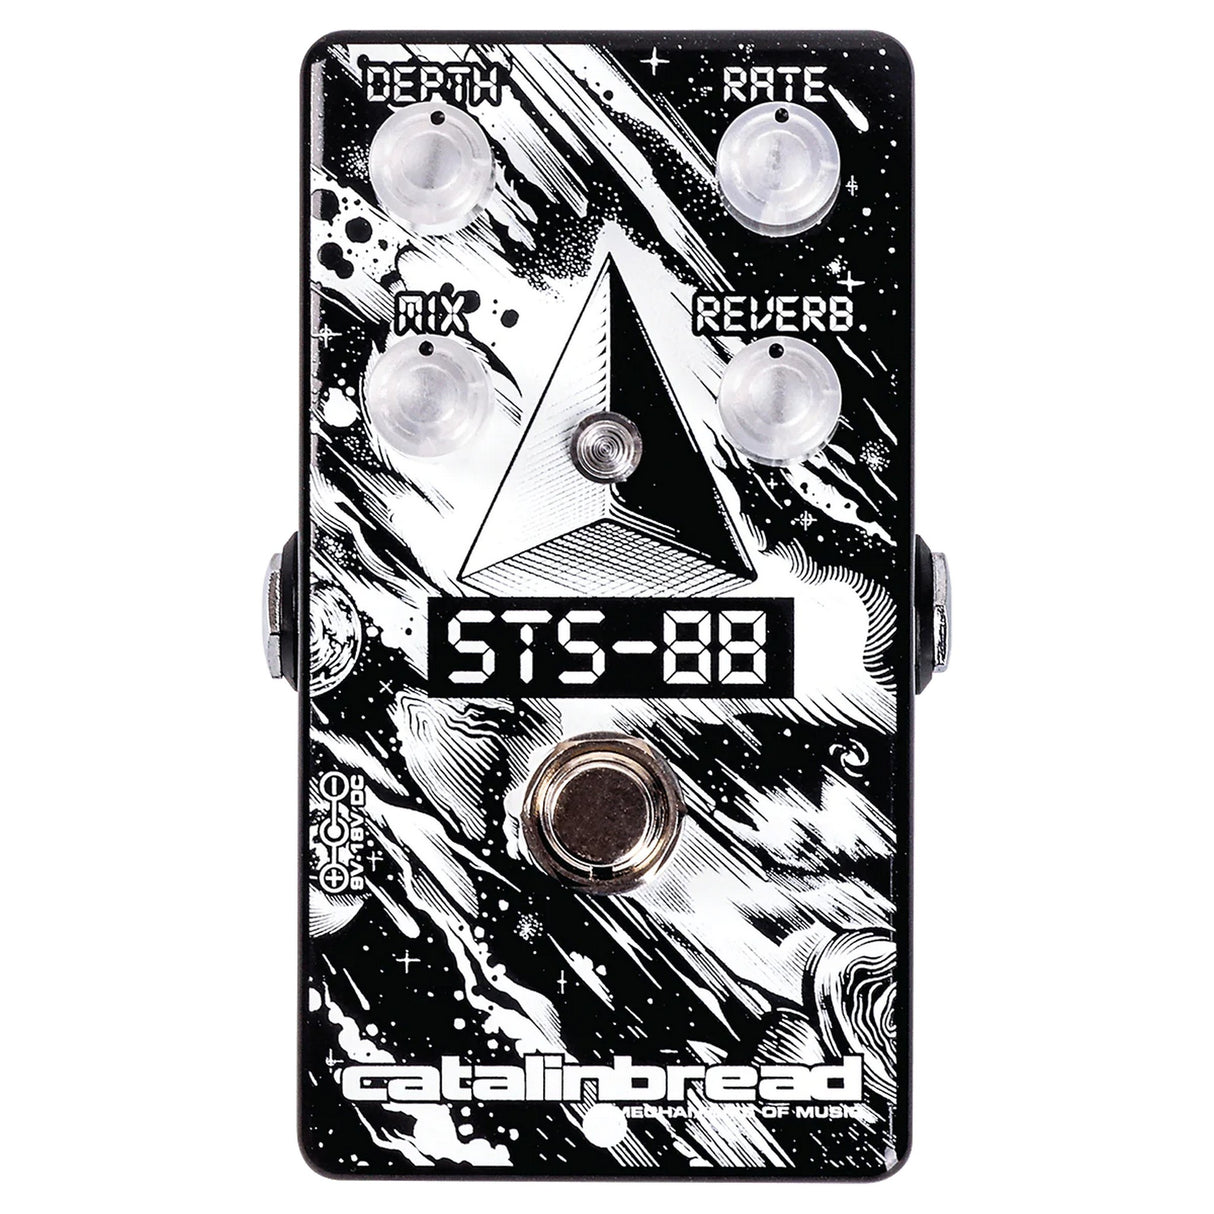 Catalinbread STS-88 Flanger/Reverb Guitar Effects Pedal